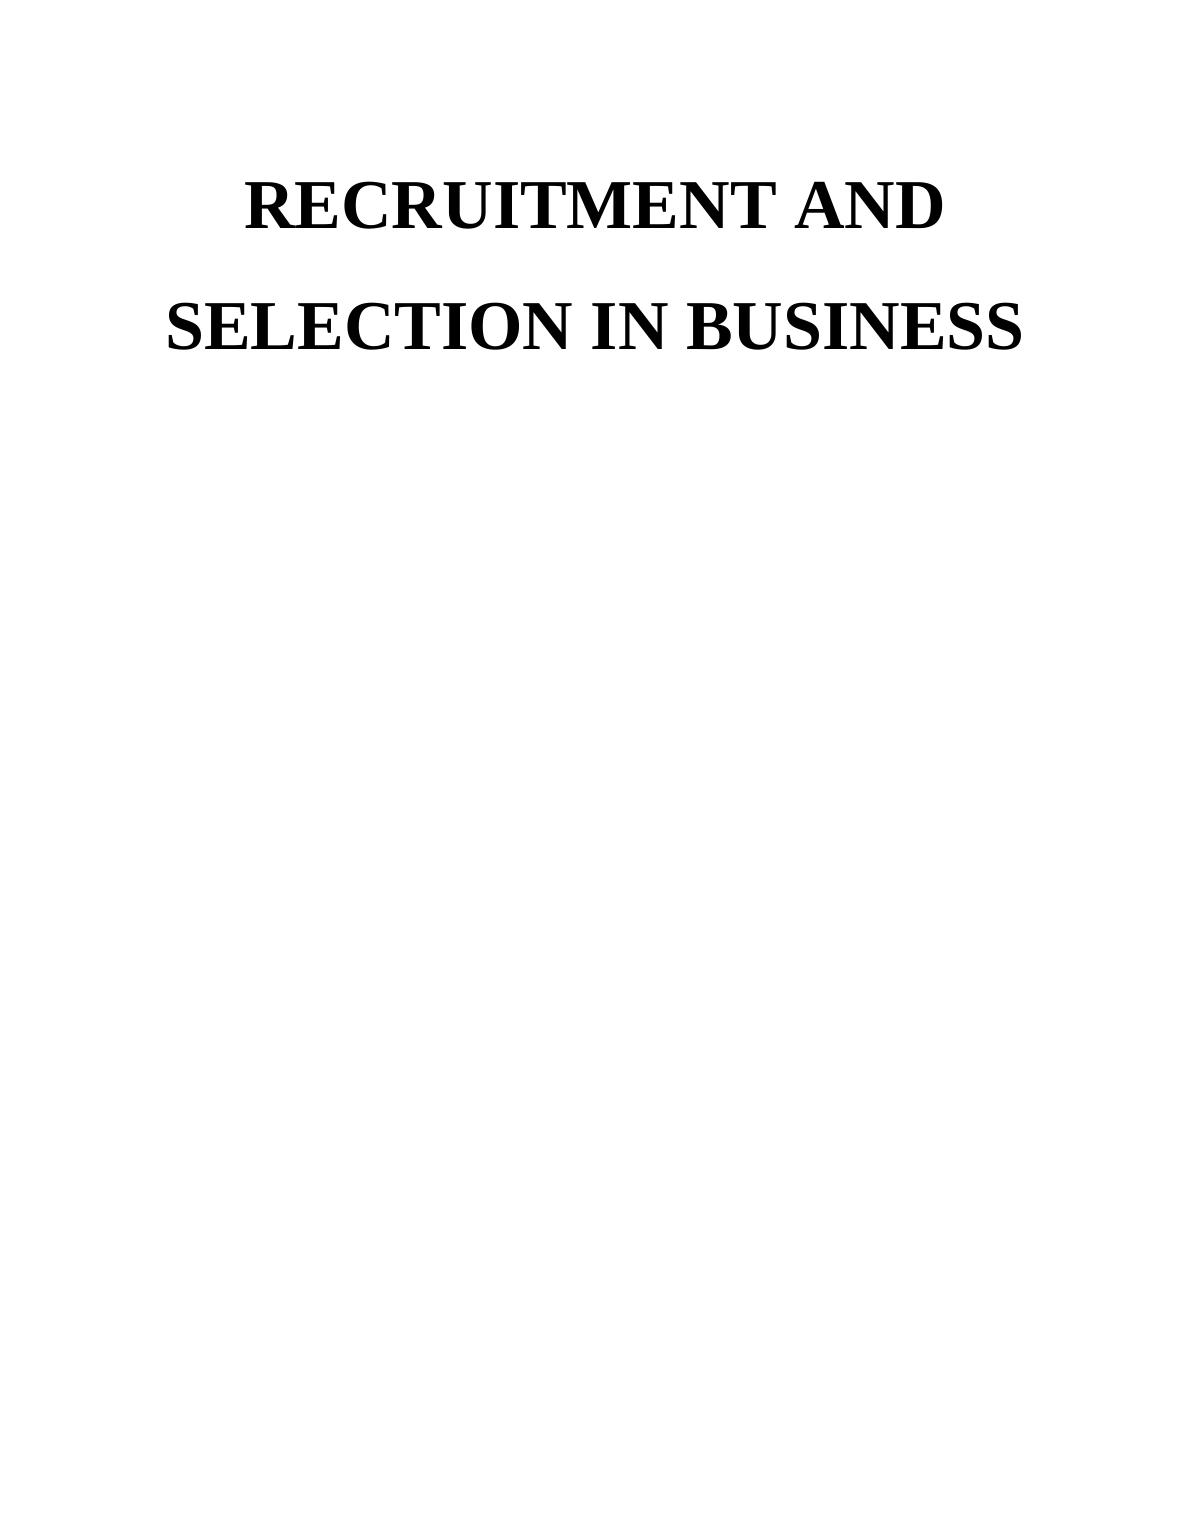 (solved) Recruitment and Selection in Business : Assignment_1